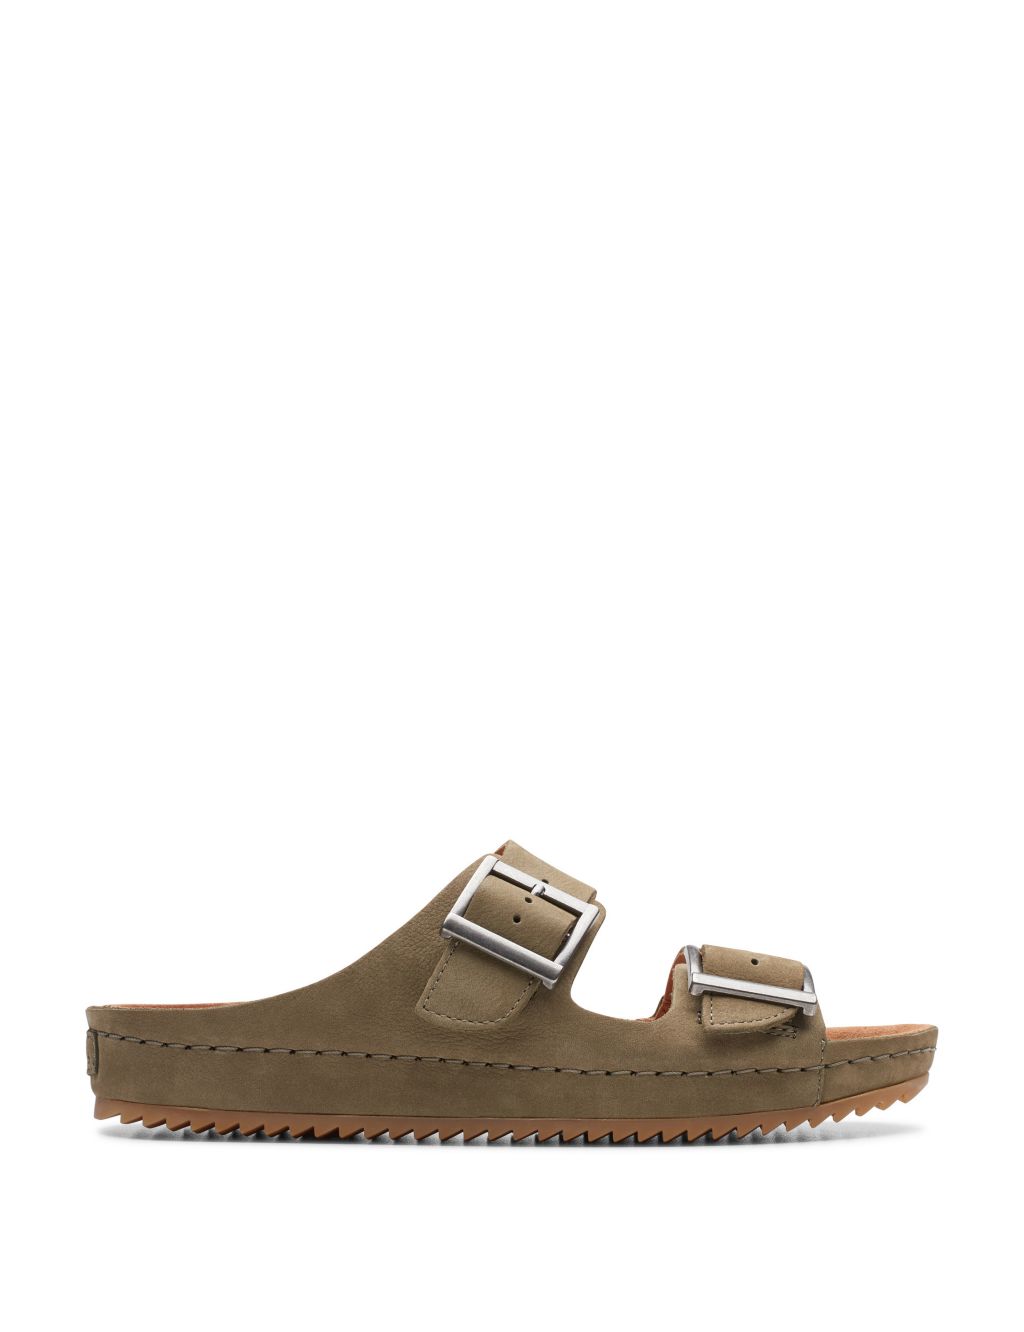 Leather Buckle Sliders, CLARKS